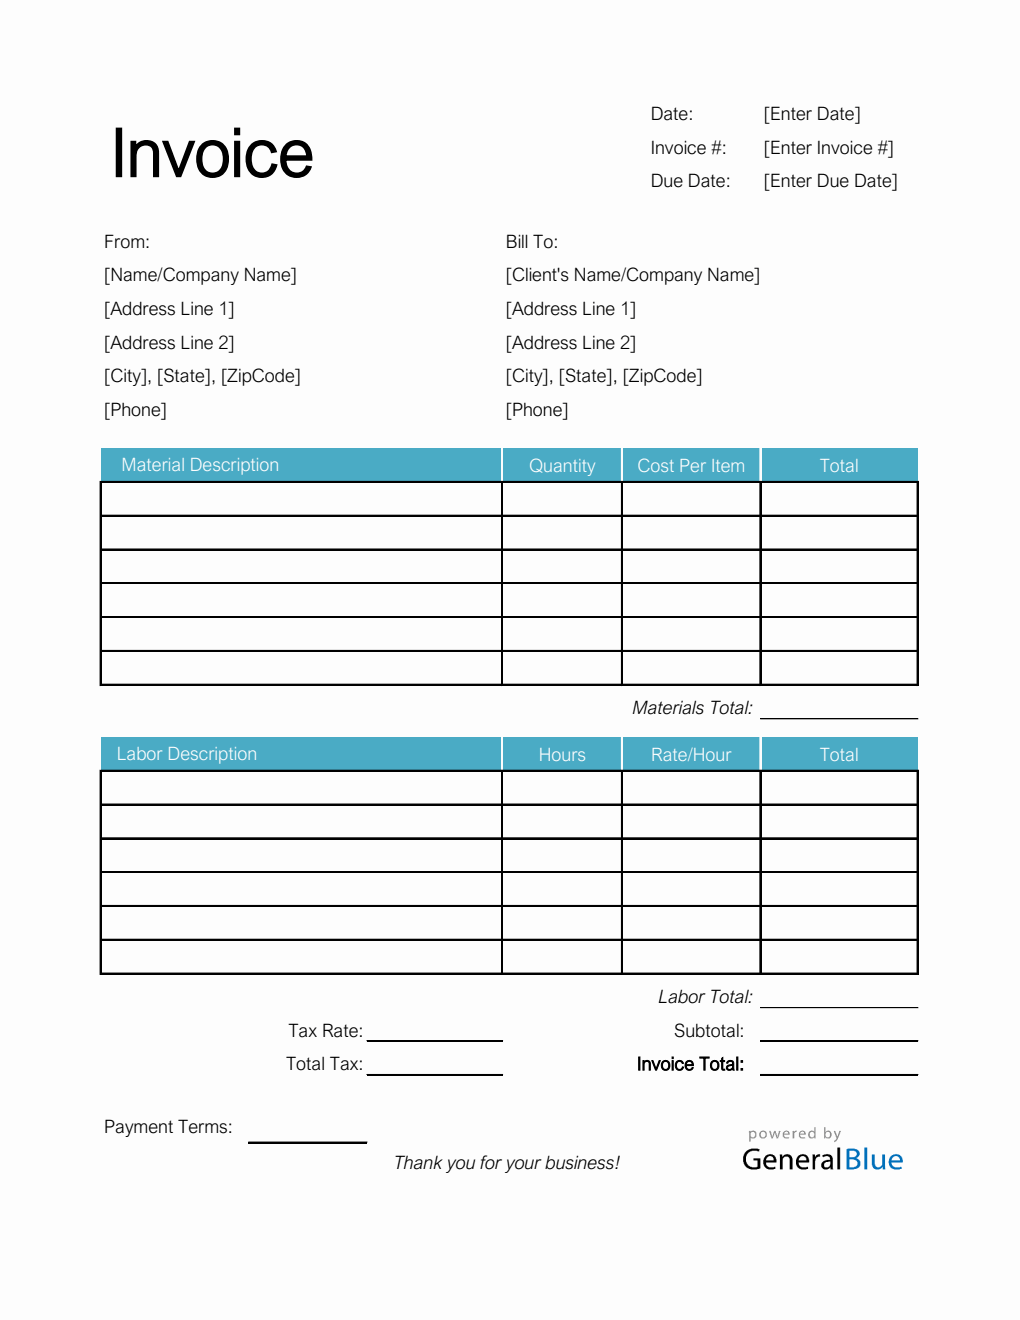 Time and Materials Invoice with Tax Calculation in Excel (Basic)